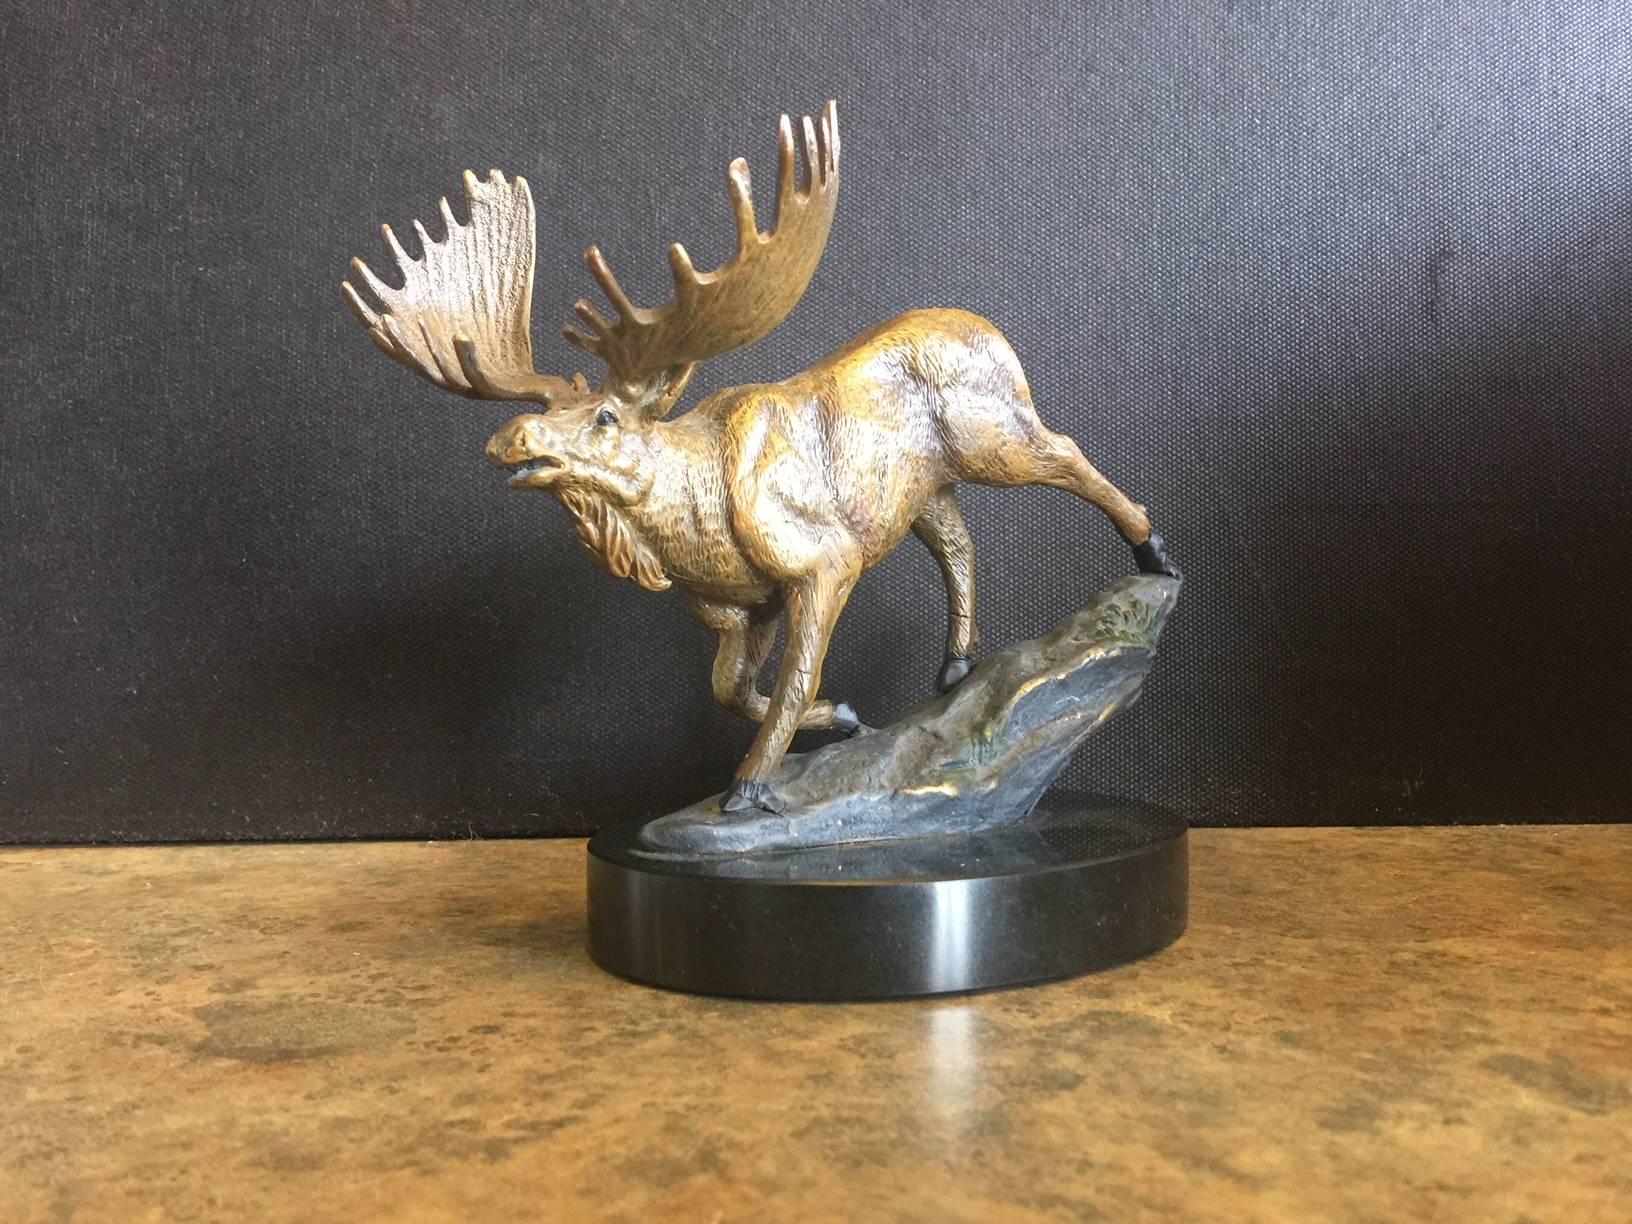 Very nice and detailed hand painted bronze moose sculpture on a black marble oval base. Th piece measures 6